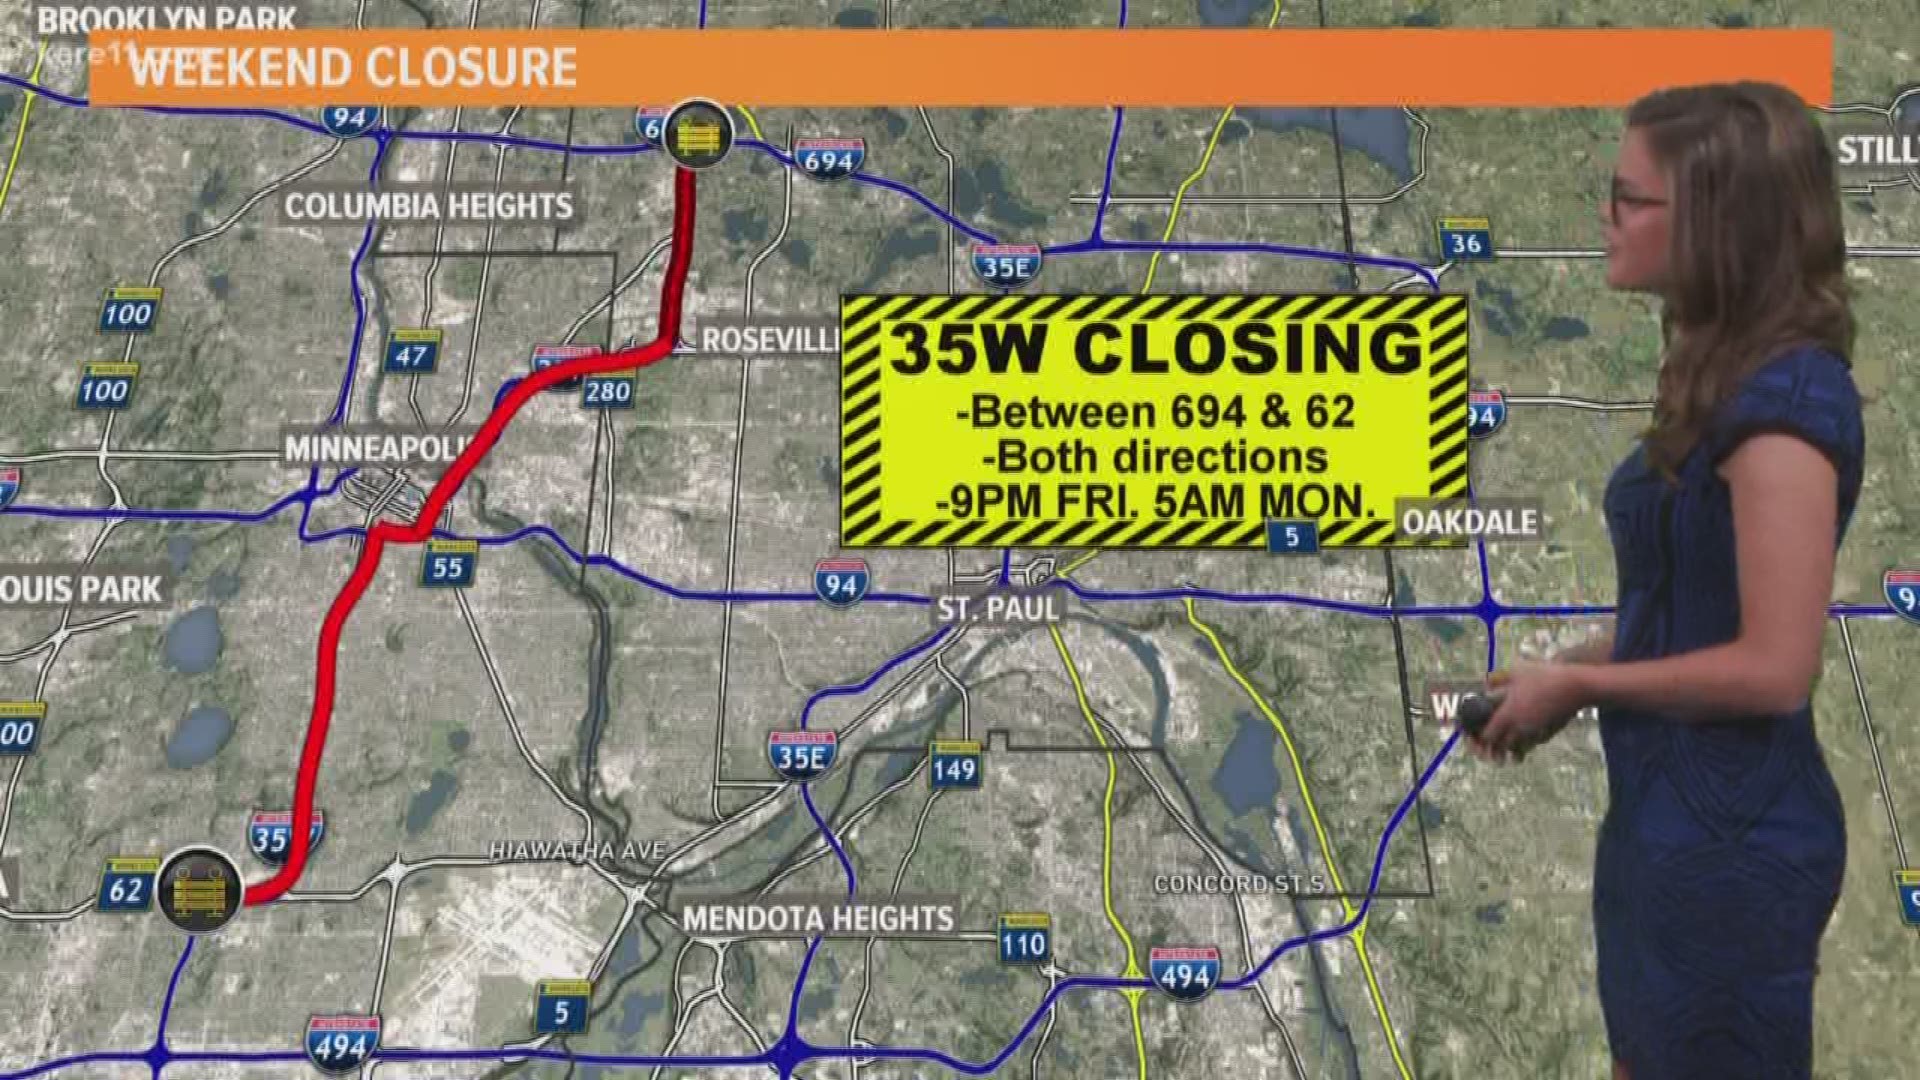 A 15-mile stretch of the major metro thoroughfare will be closed from 9 p.m. Friday, July 27 to 5 a.m. Monday, July 30. And don't worry - we might get to do it all over again next weekend! https://kare11.tv/2LqK5eG